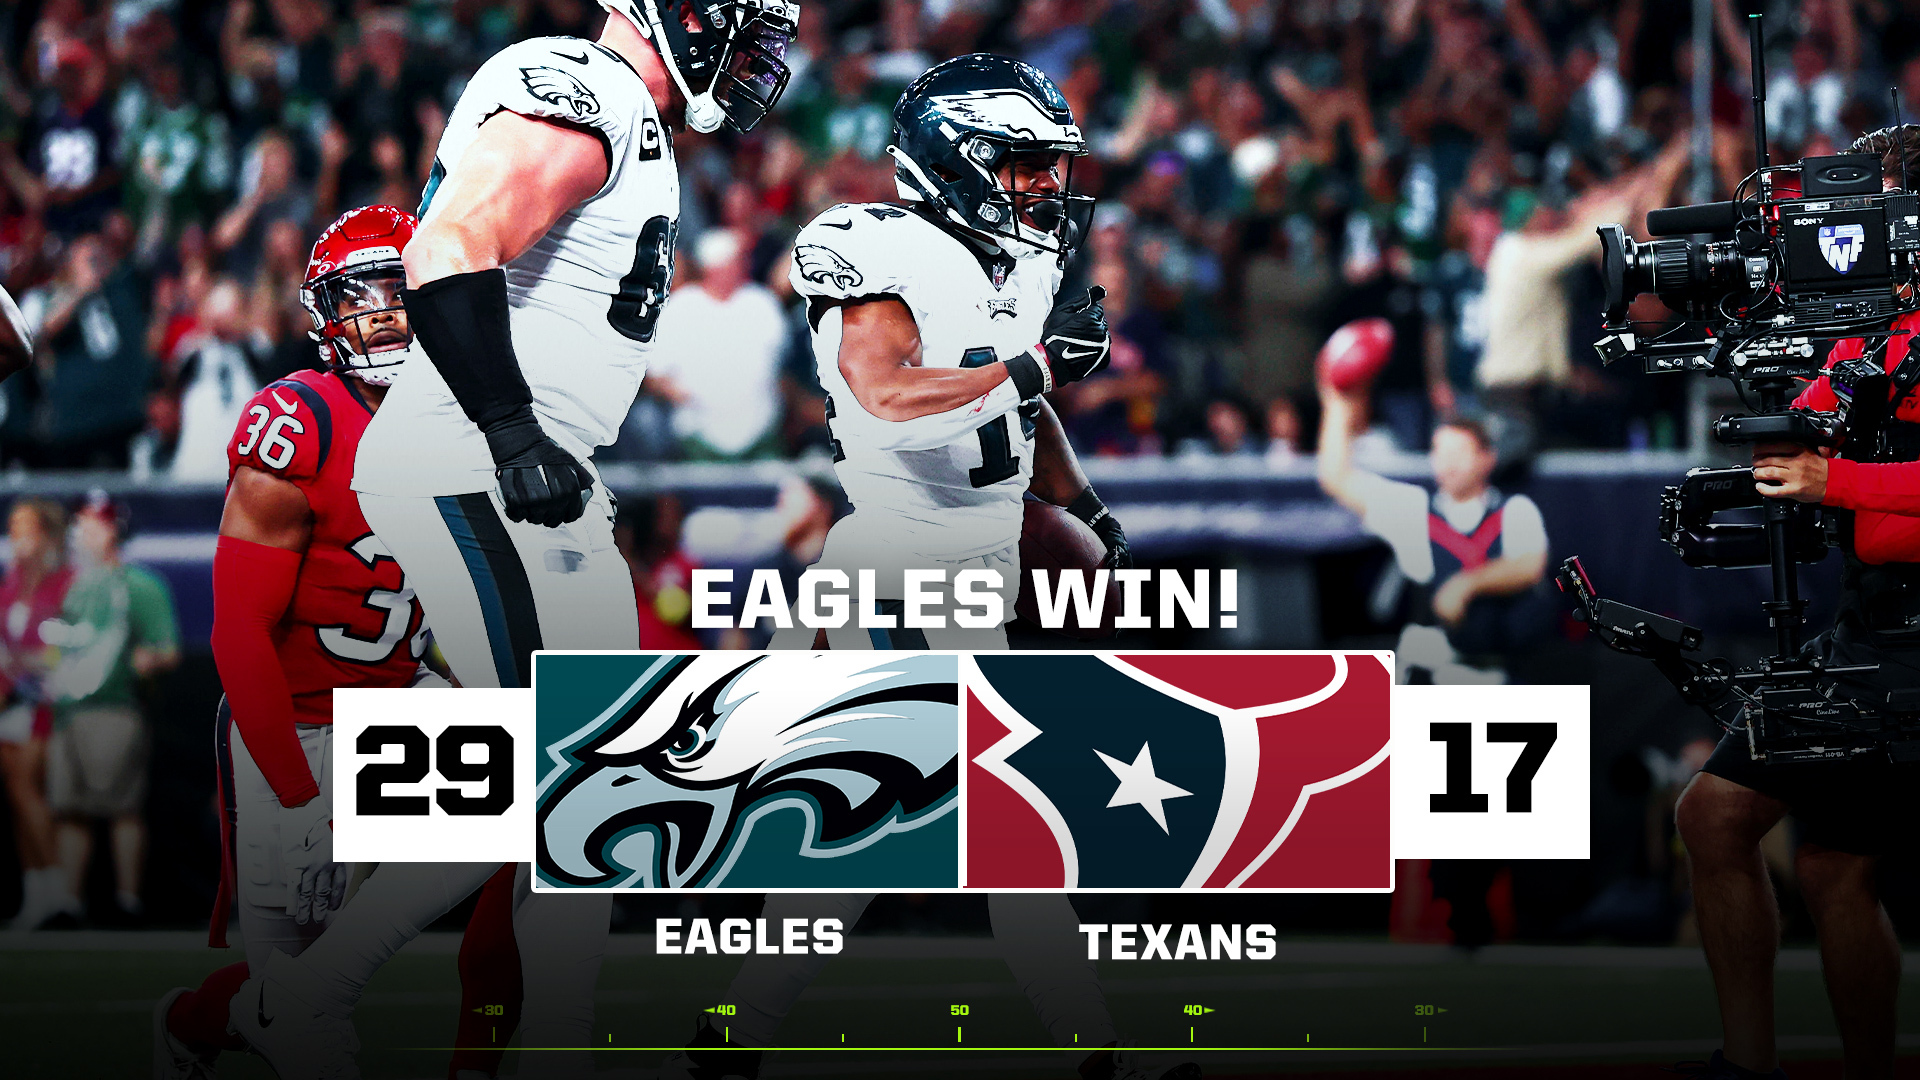 Texans Kept It Close, But Eagles Simply Better in 29-17 Win